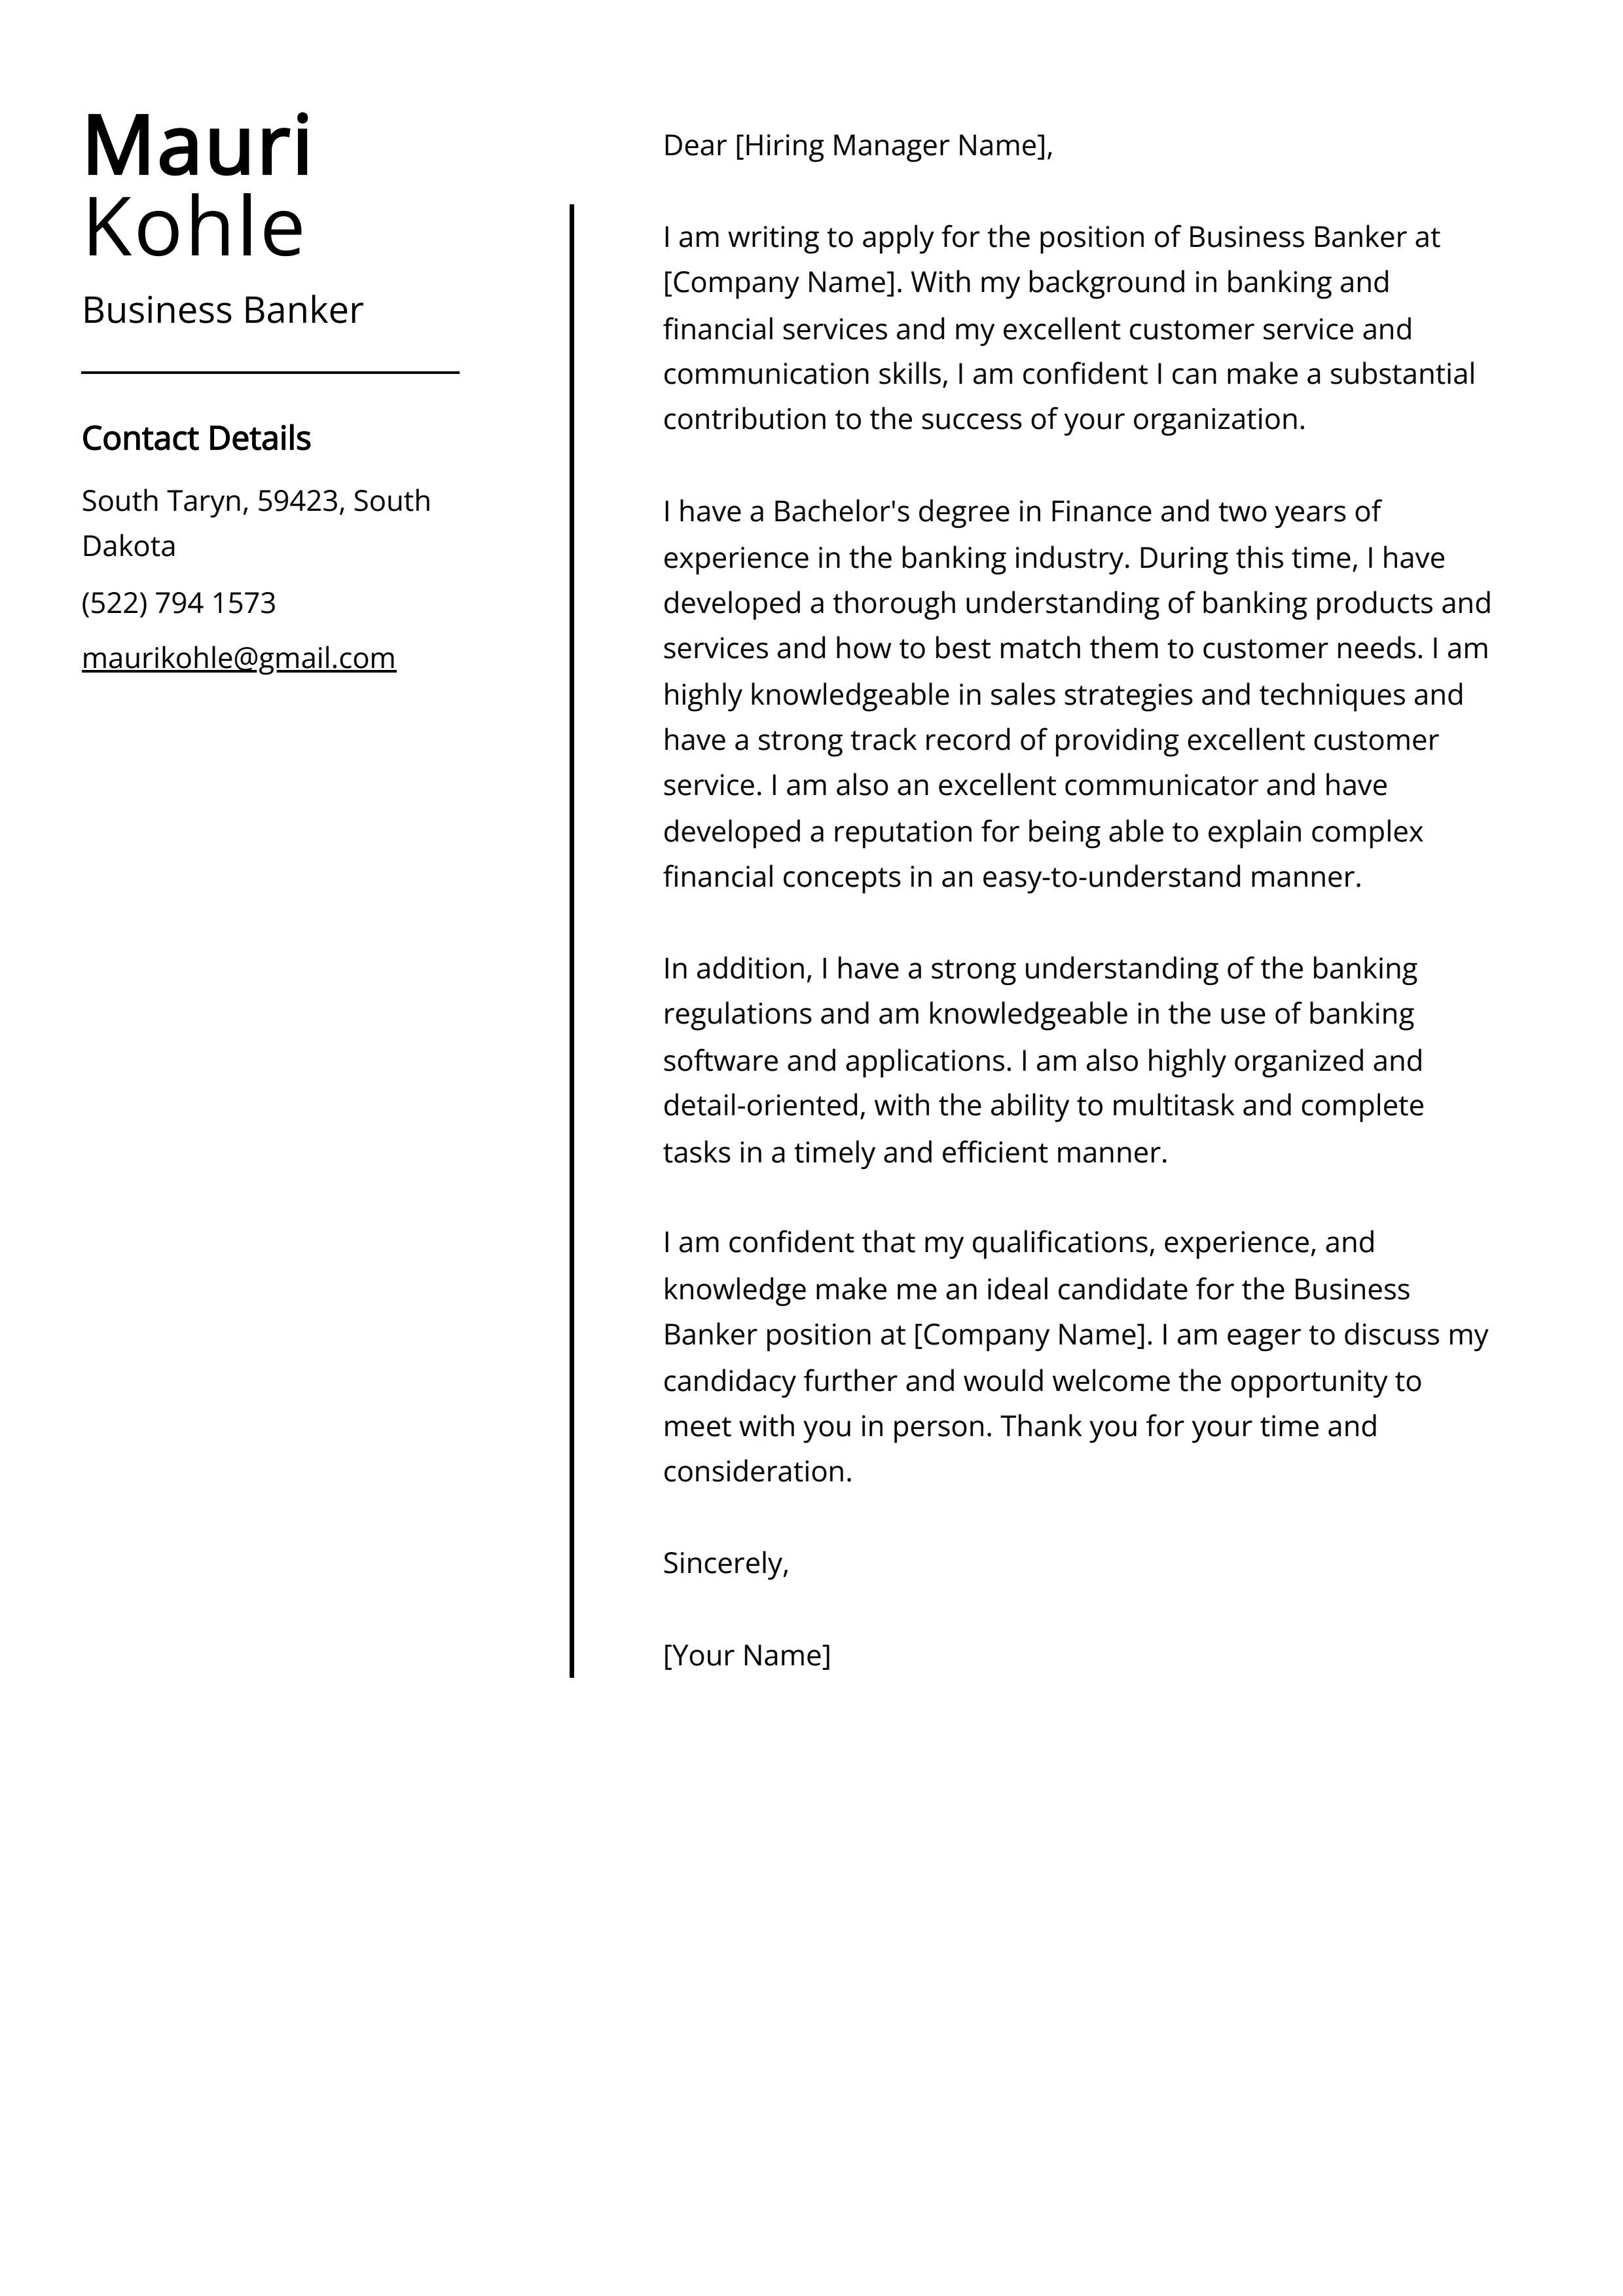 Business Banker Cover Letter Example